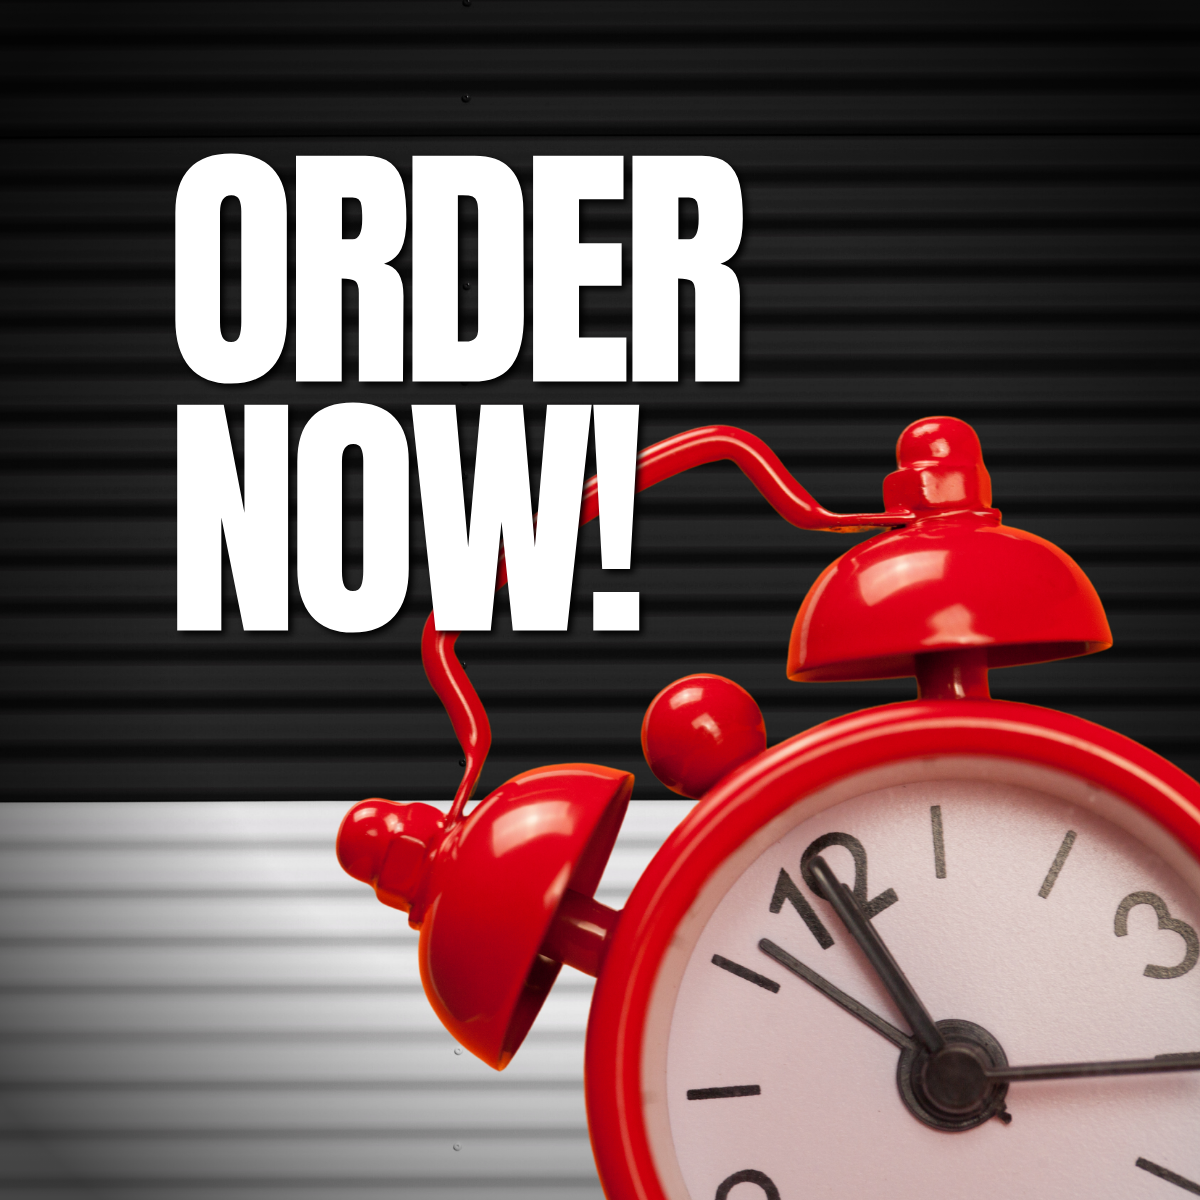 The words "Order Now!" with a red clock against a black background